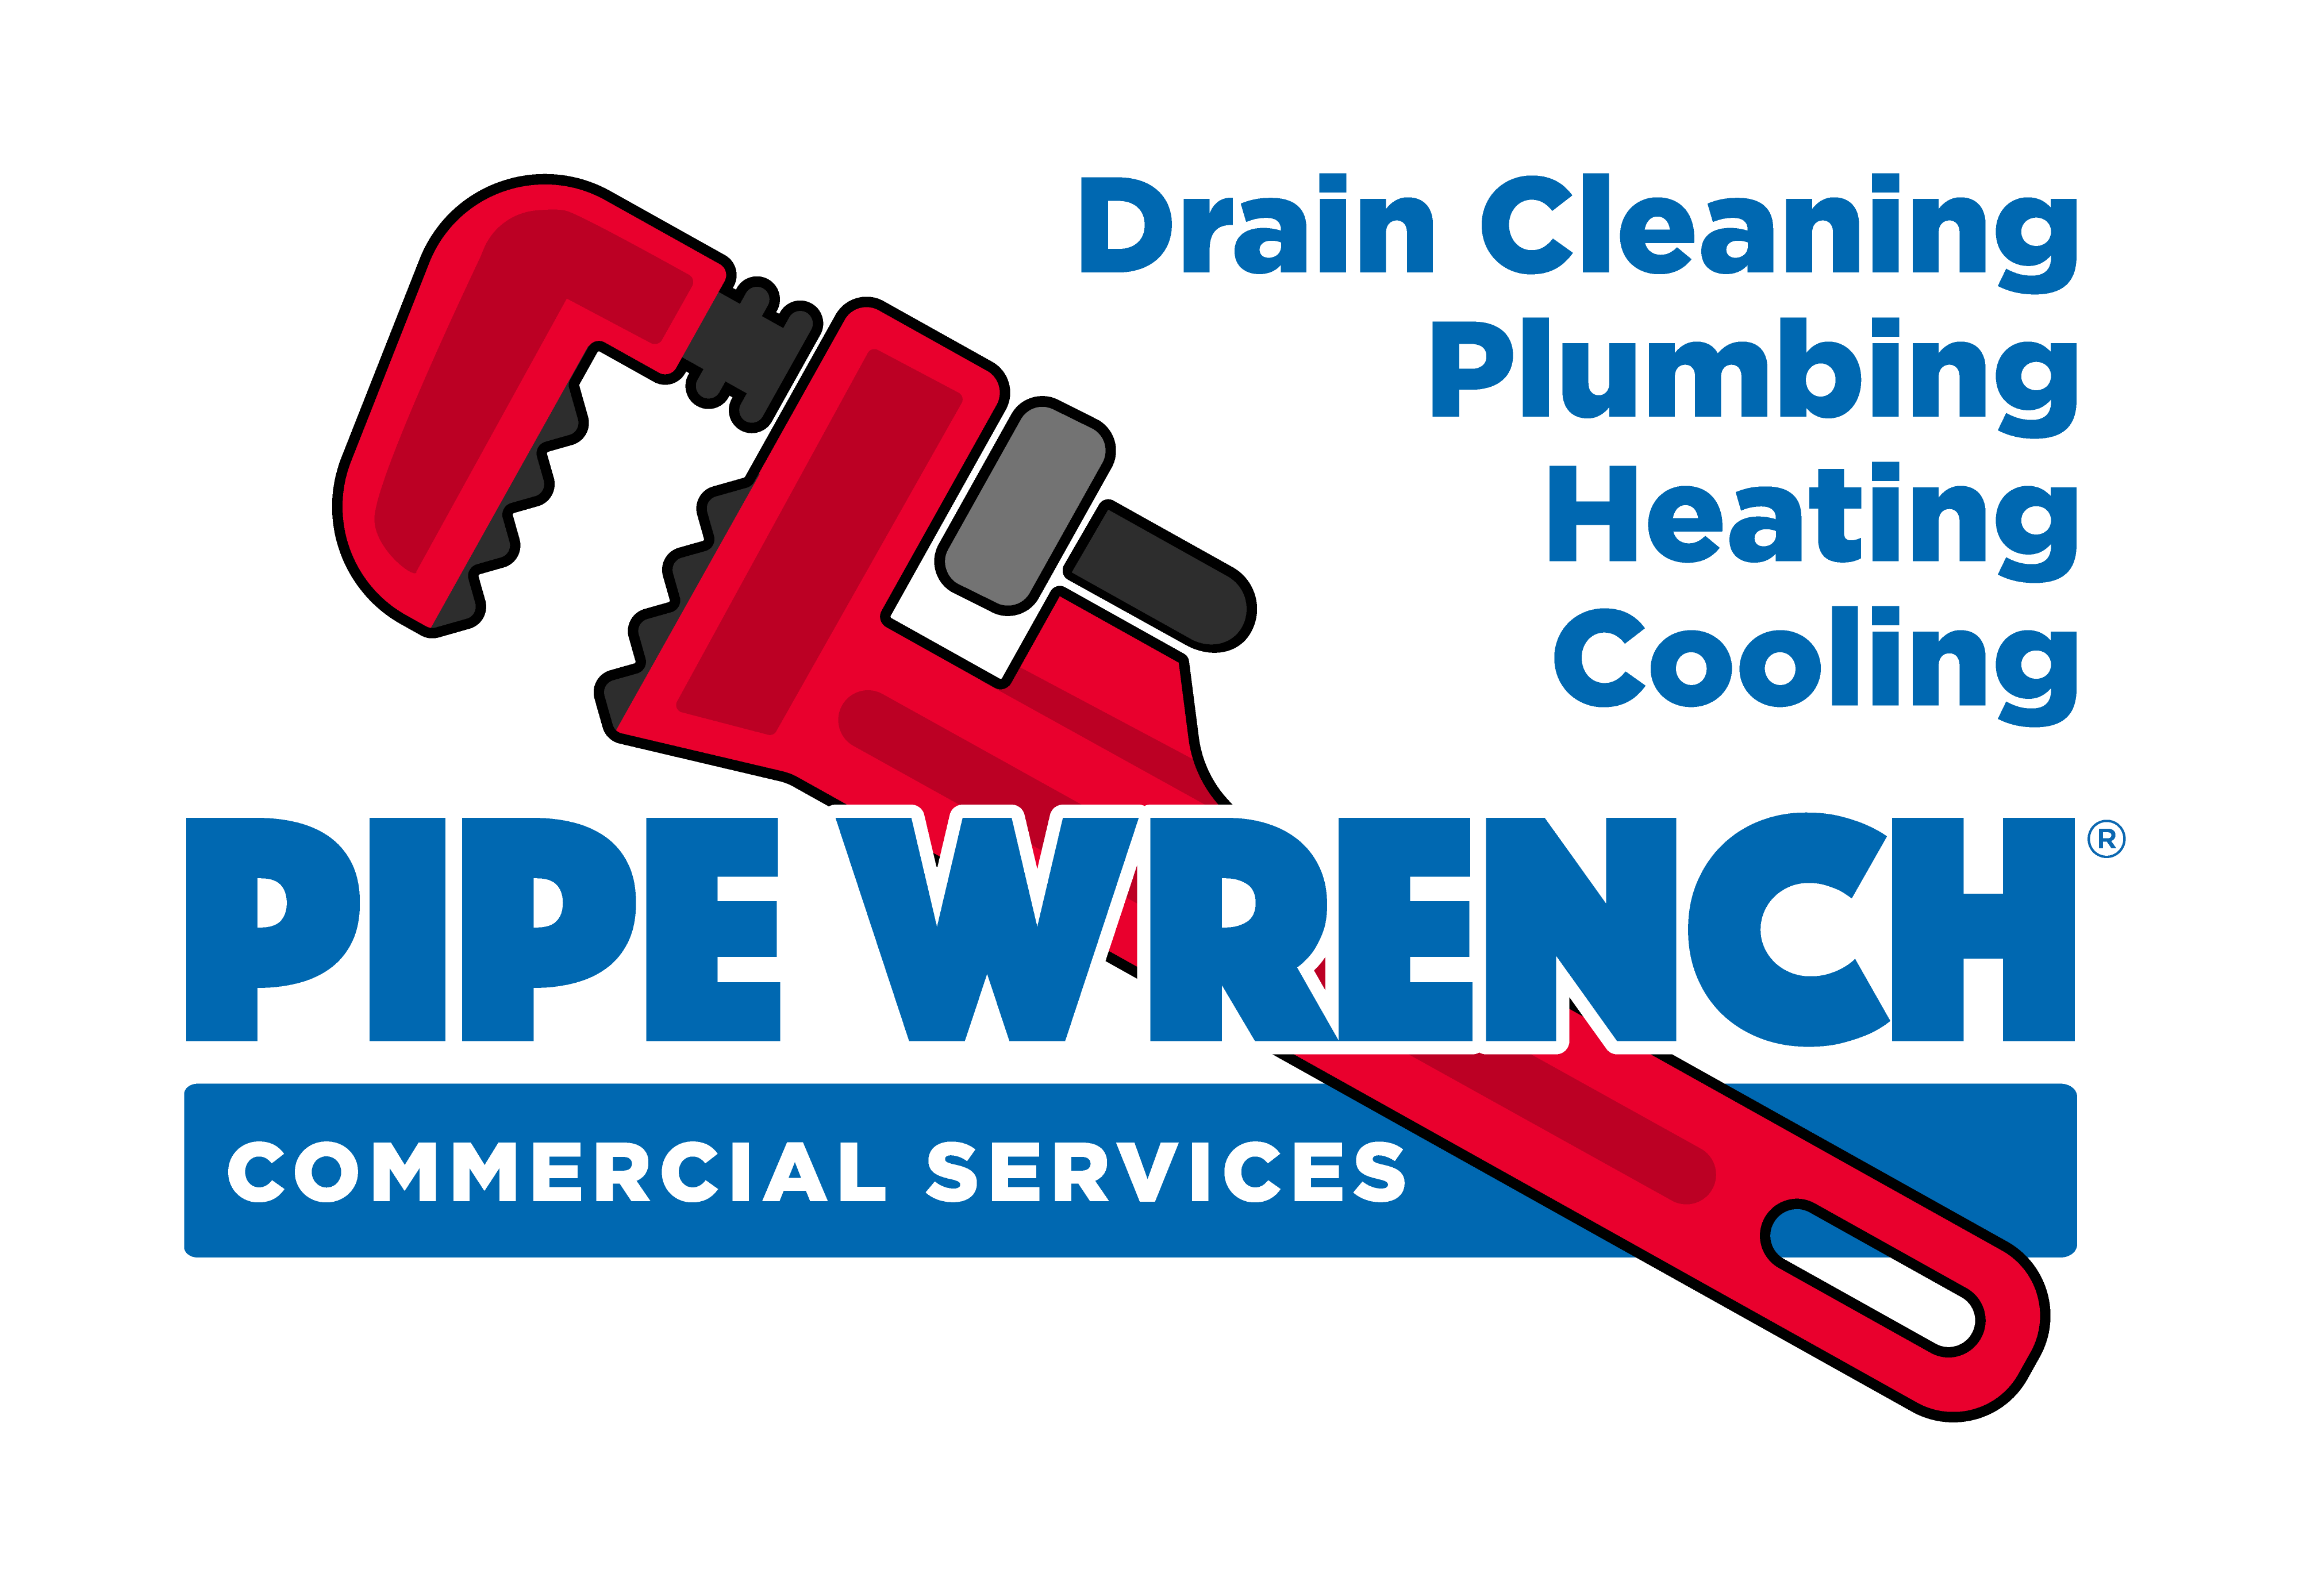 Pipe Wrench Plumbing, Heating & Cooling, Inc. Company Logo